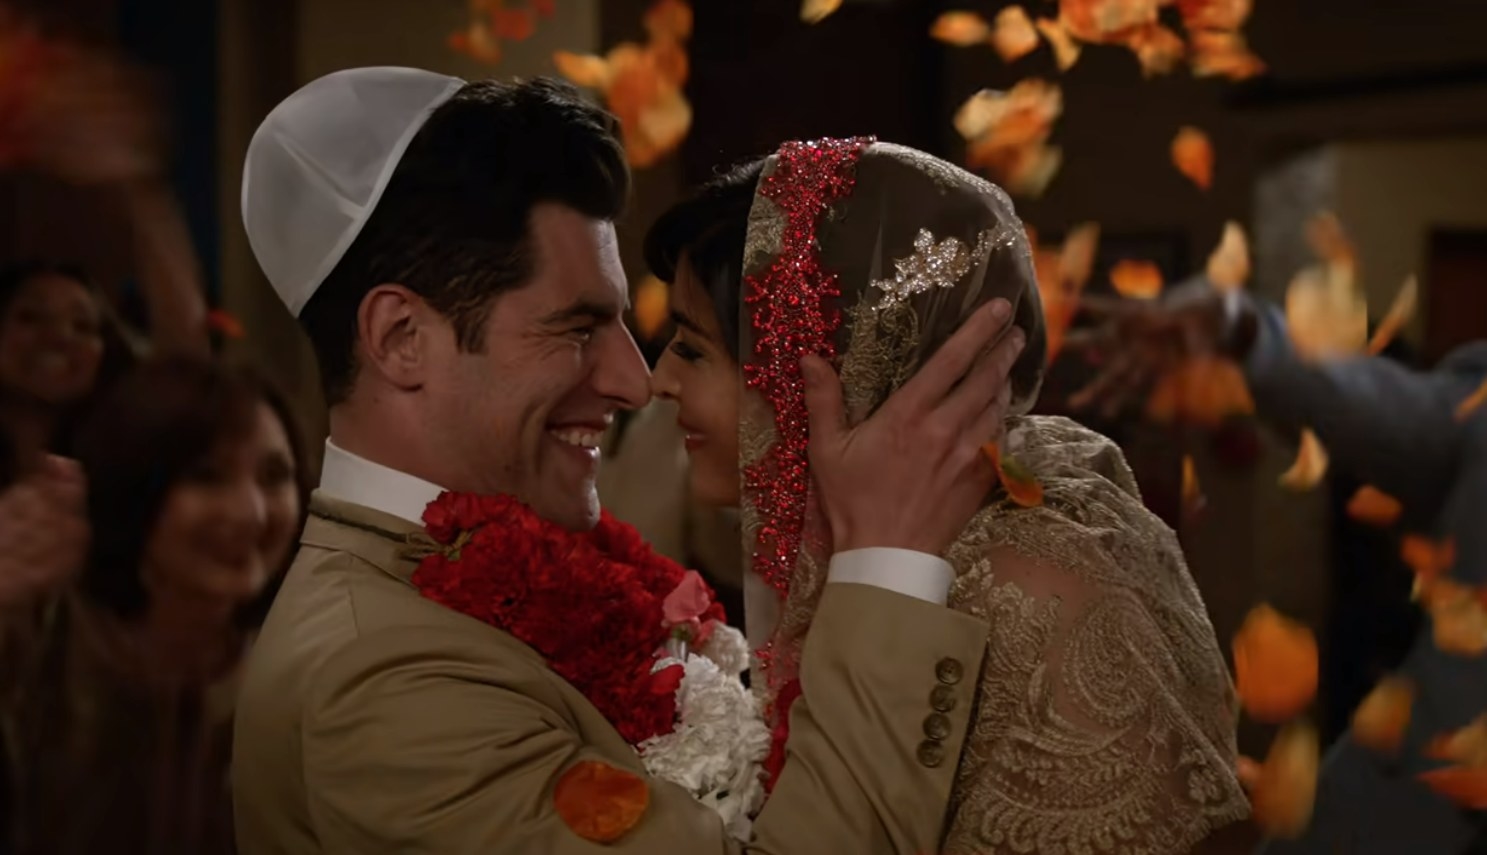 Schmidt and Cece&#x27;s wedding staring lovingly into each other&#x27;s eyes